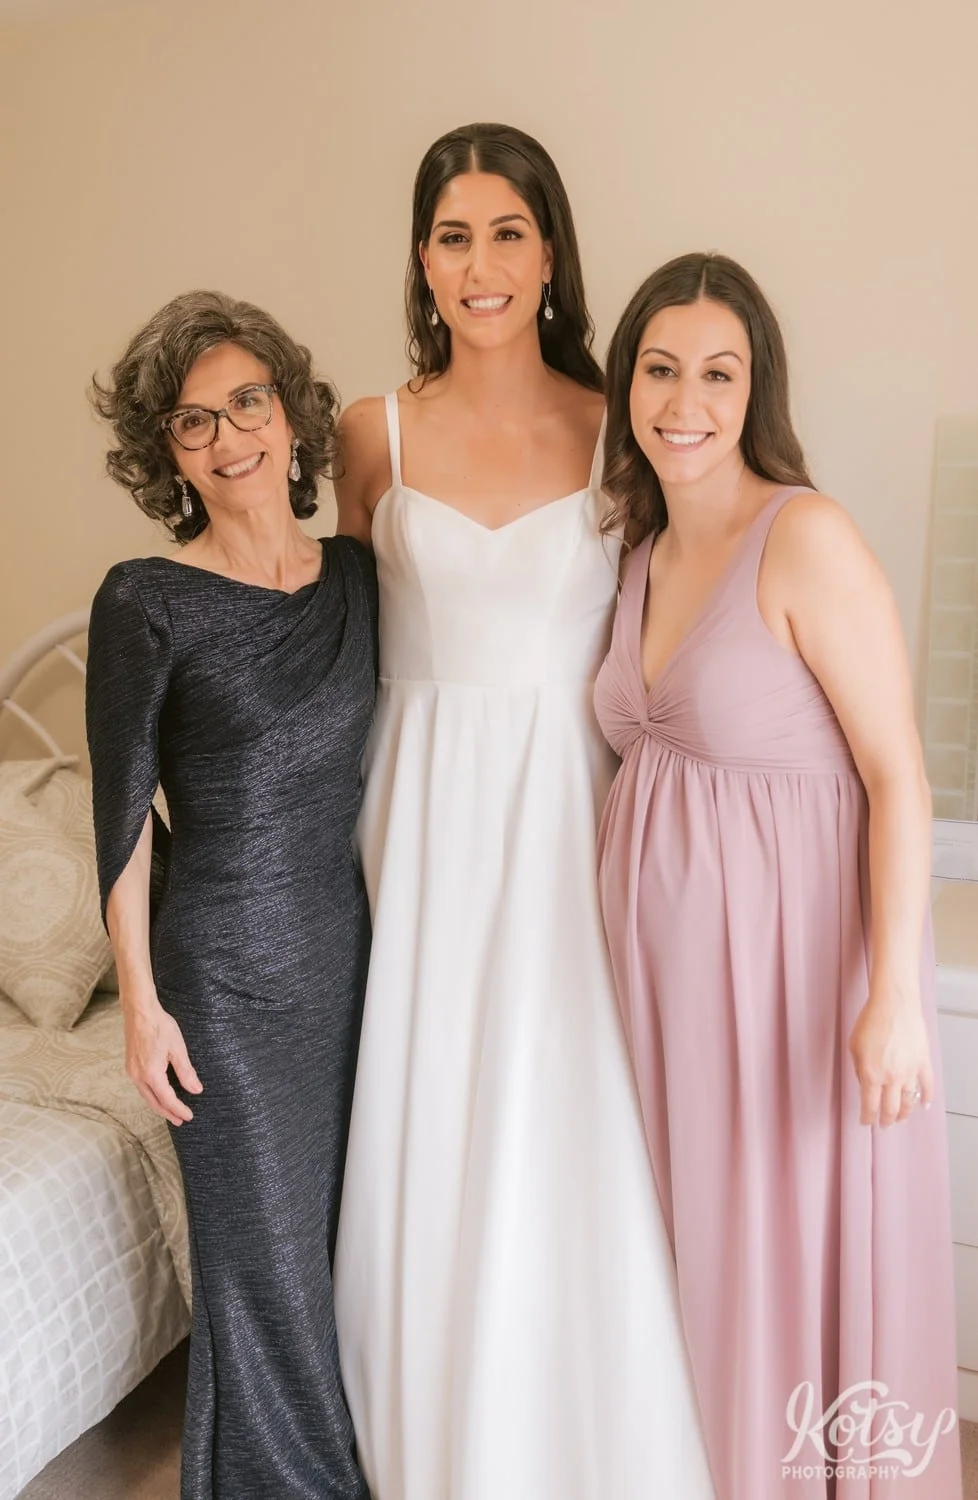 A bride wearing a white wedding gown poses for a group photo with her mother and sister.